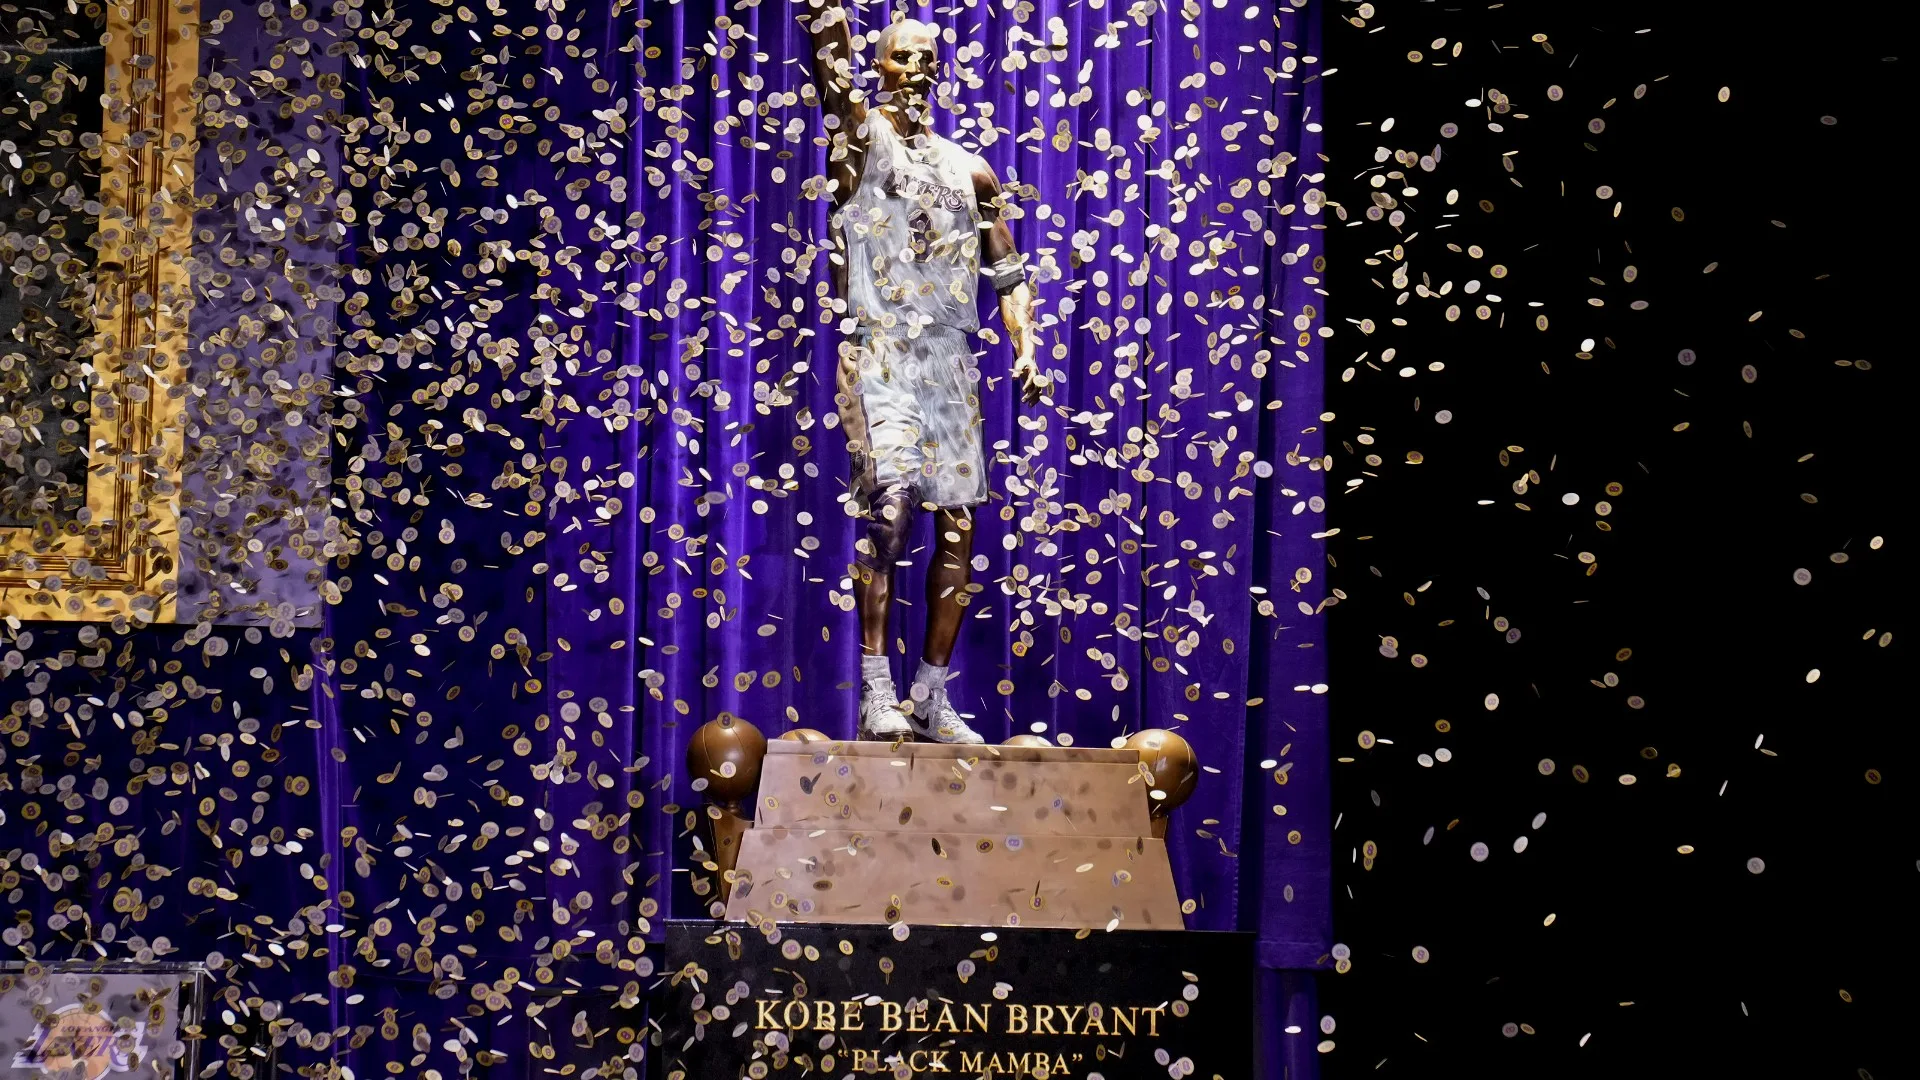 A bronze statue of Kobe Bryant in a Lakers jersey, with his right index finger raised, outside Crypto.com Arena.